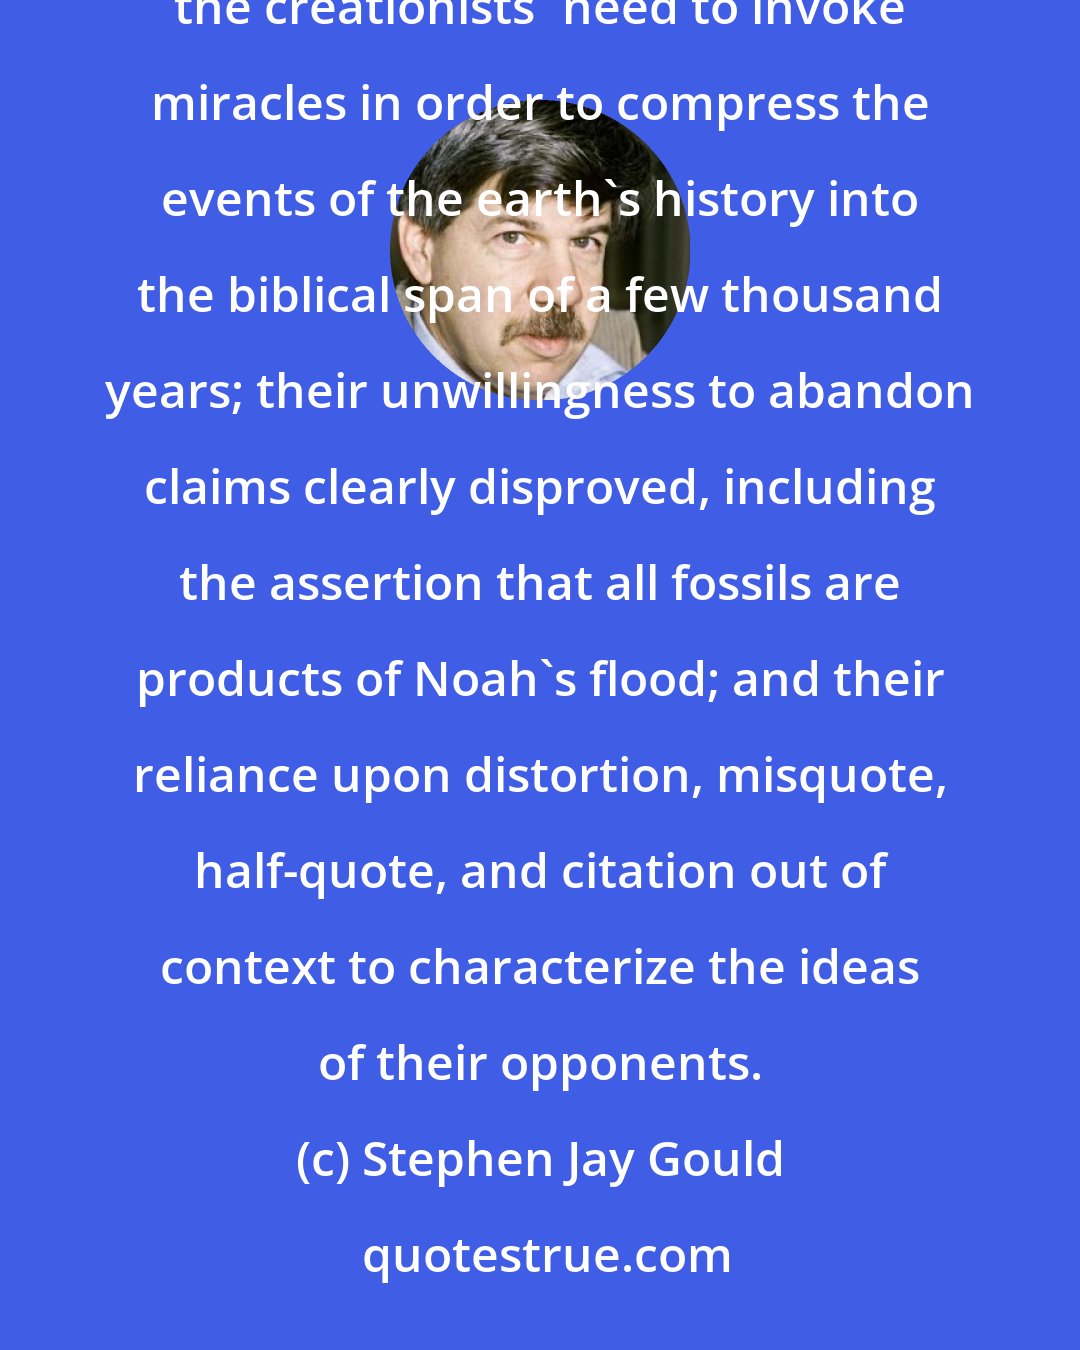 Stephen Jay Gould: The argument that the literal story of Genesis can qualify as science collapses on three major grounds: the creationists' need to invoke miracles in order to compress the events of the earth's history into the biblical span of a few thousand years; their unwillingness to abandon claims clearly disproved, including the assertion that all fossils are products of Noah's flood; and their reliance upon distortion, misquote, half-quote, and citation out of context to characterize the ideas of their opponents.